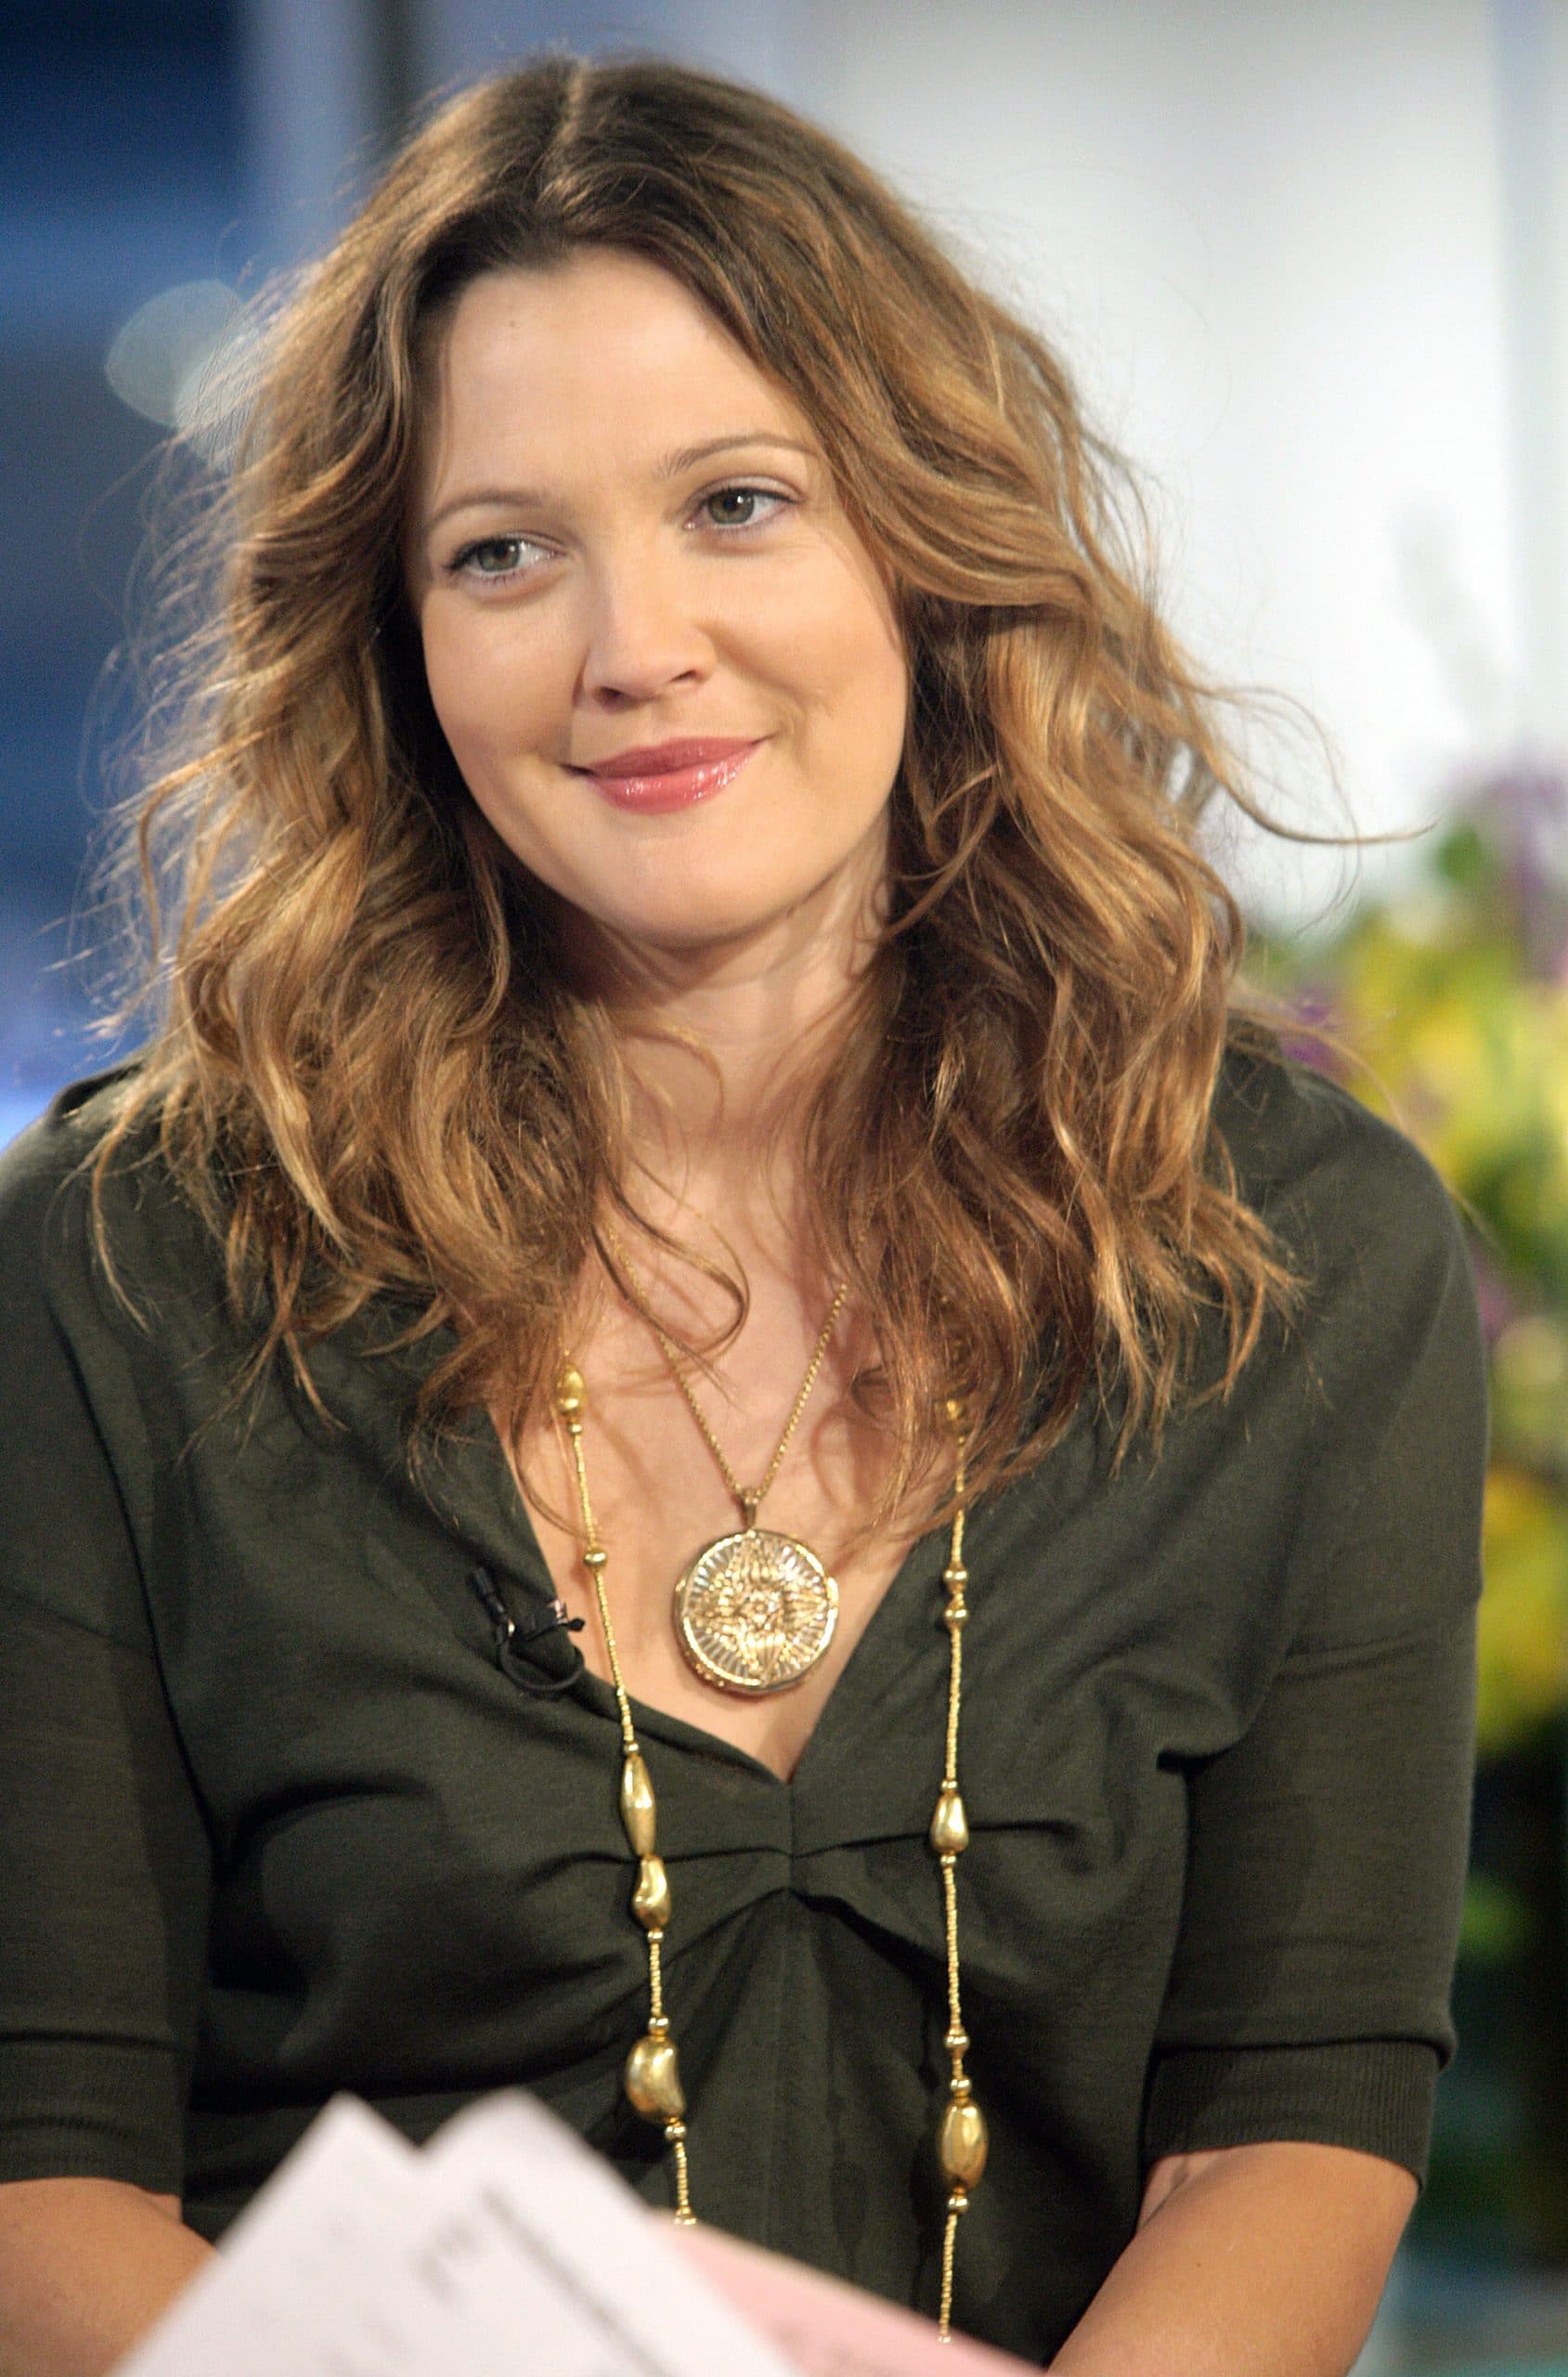 THE TODAY SHOW, Drew Barrymore,